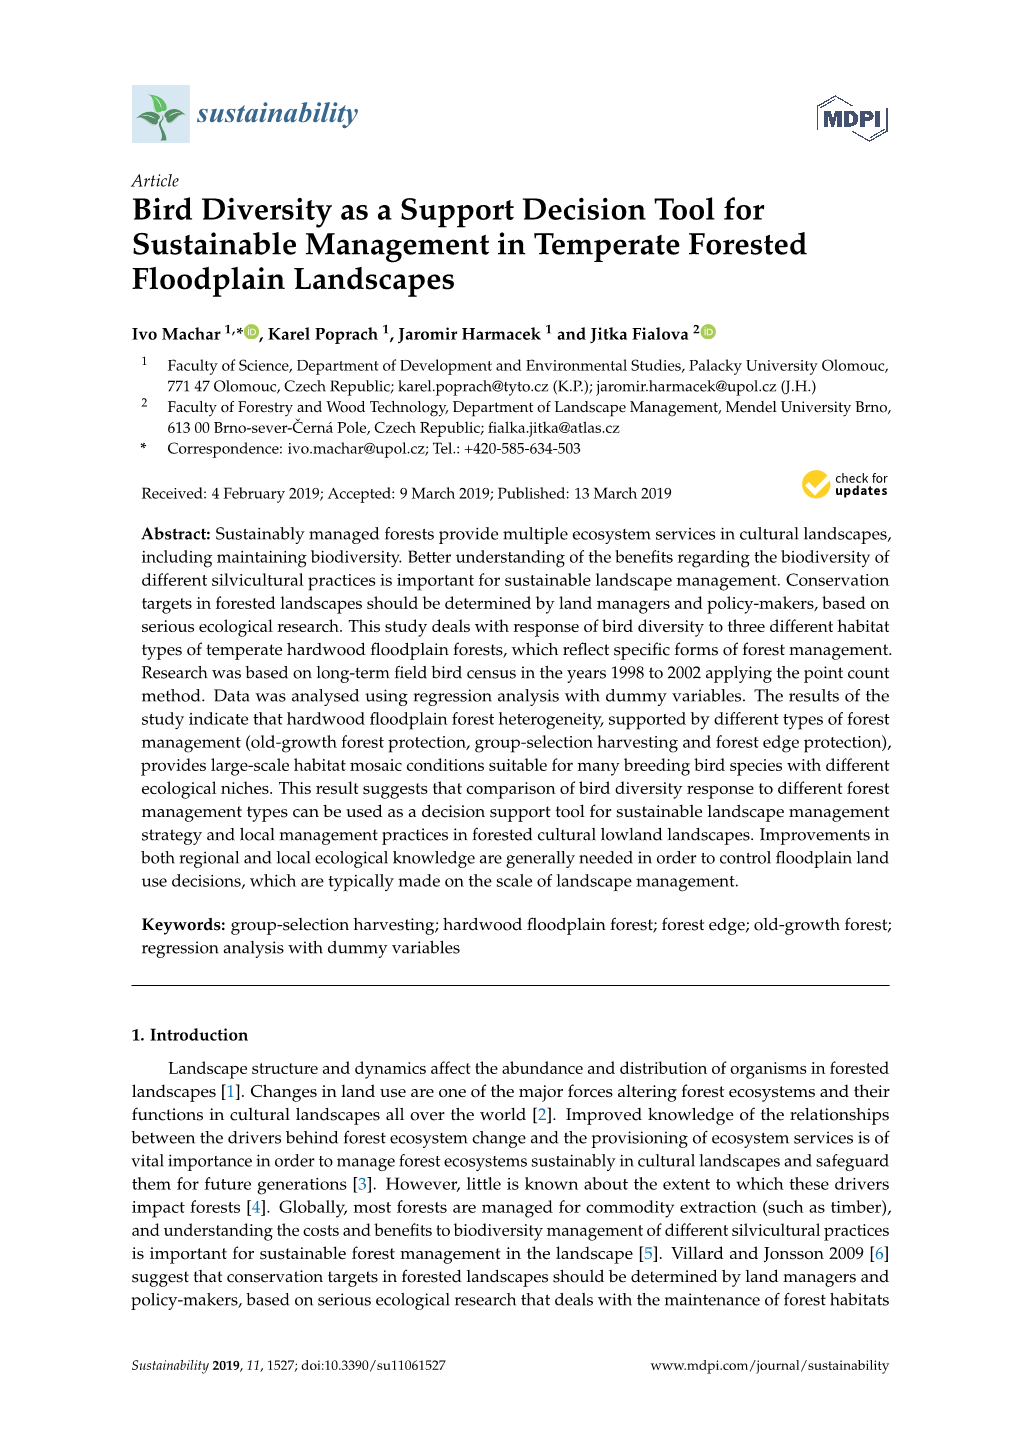 Bird Diversity As a Support Decision Tool for Sustainable Management in Temperate Forested Floodplain Landscapes